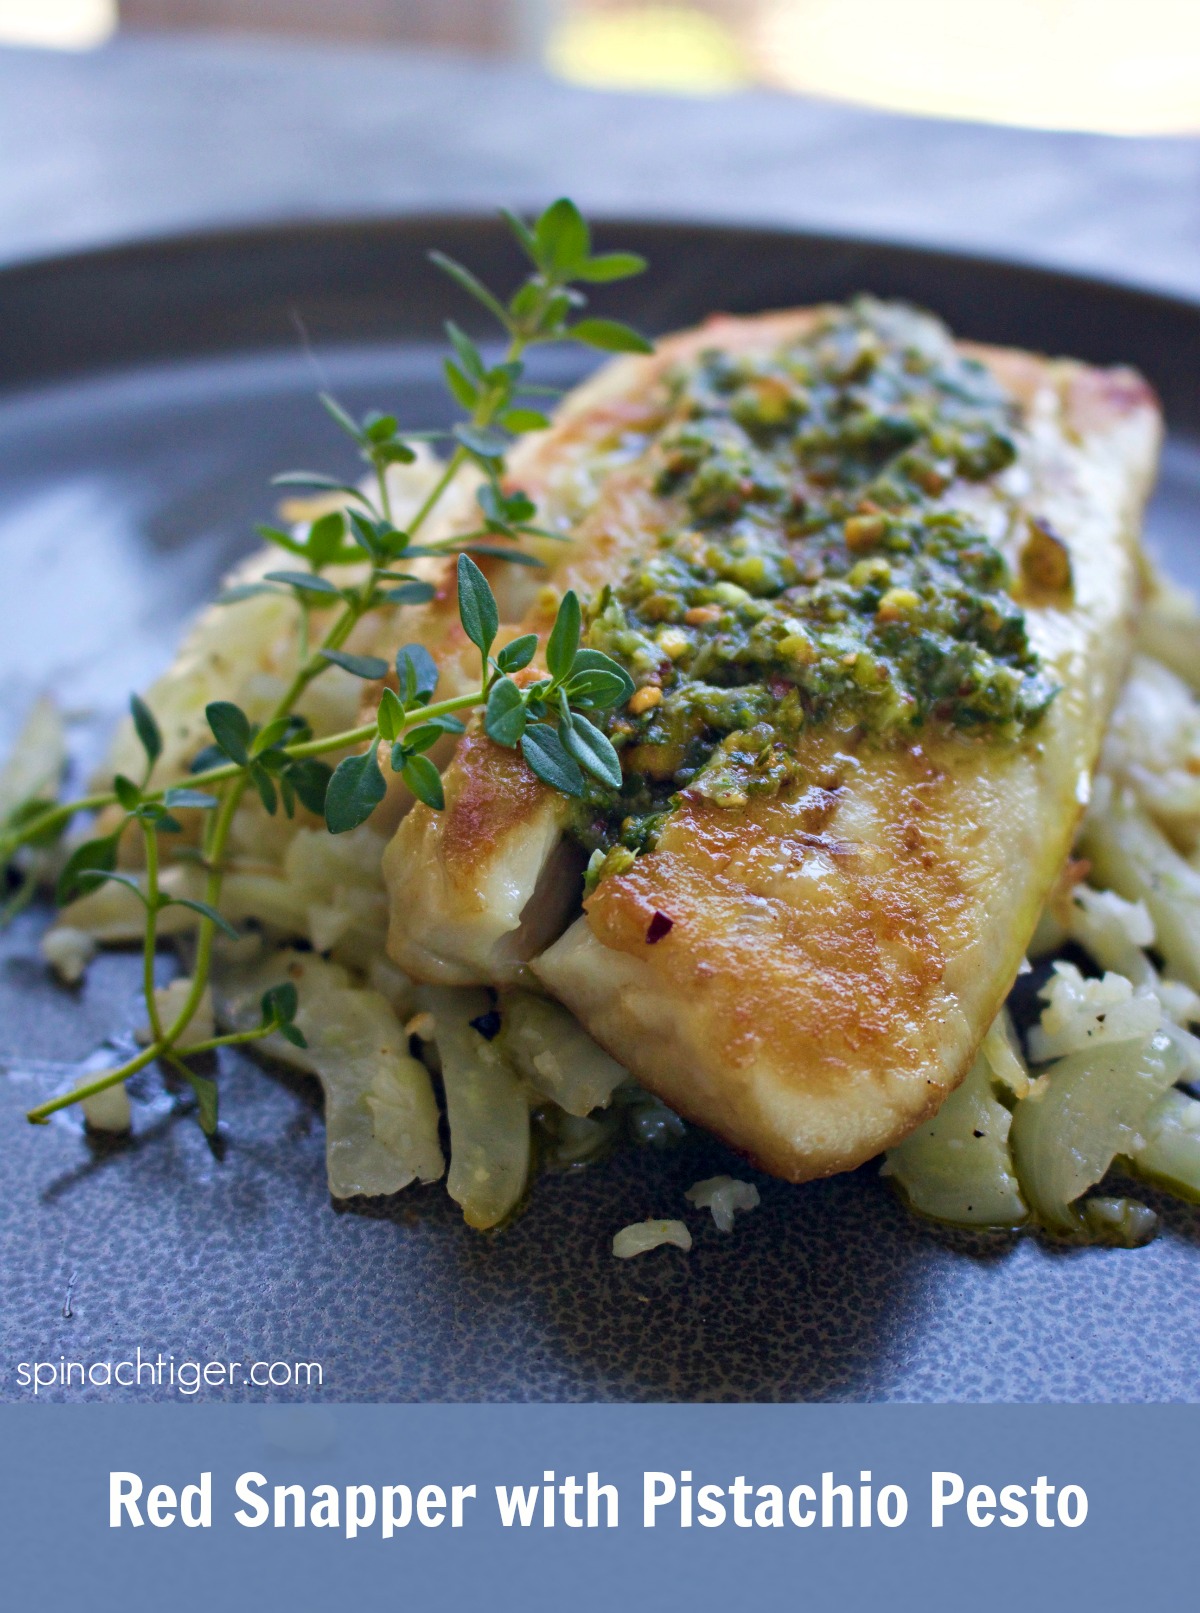 Baked Red Snapper Recipe with Pistachio Pesto with Cauliflower Rice from Spinach TIger 